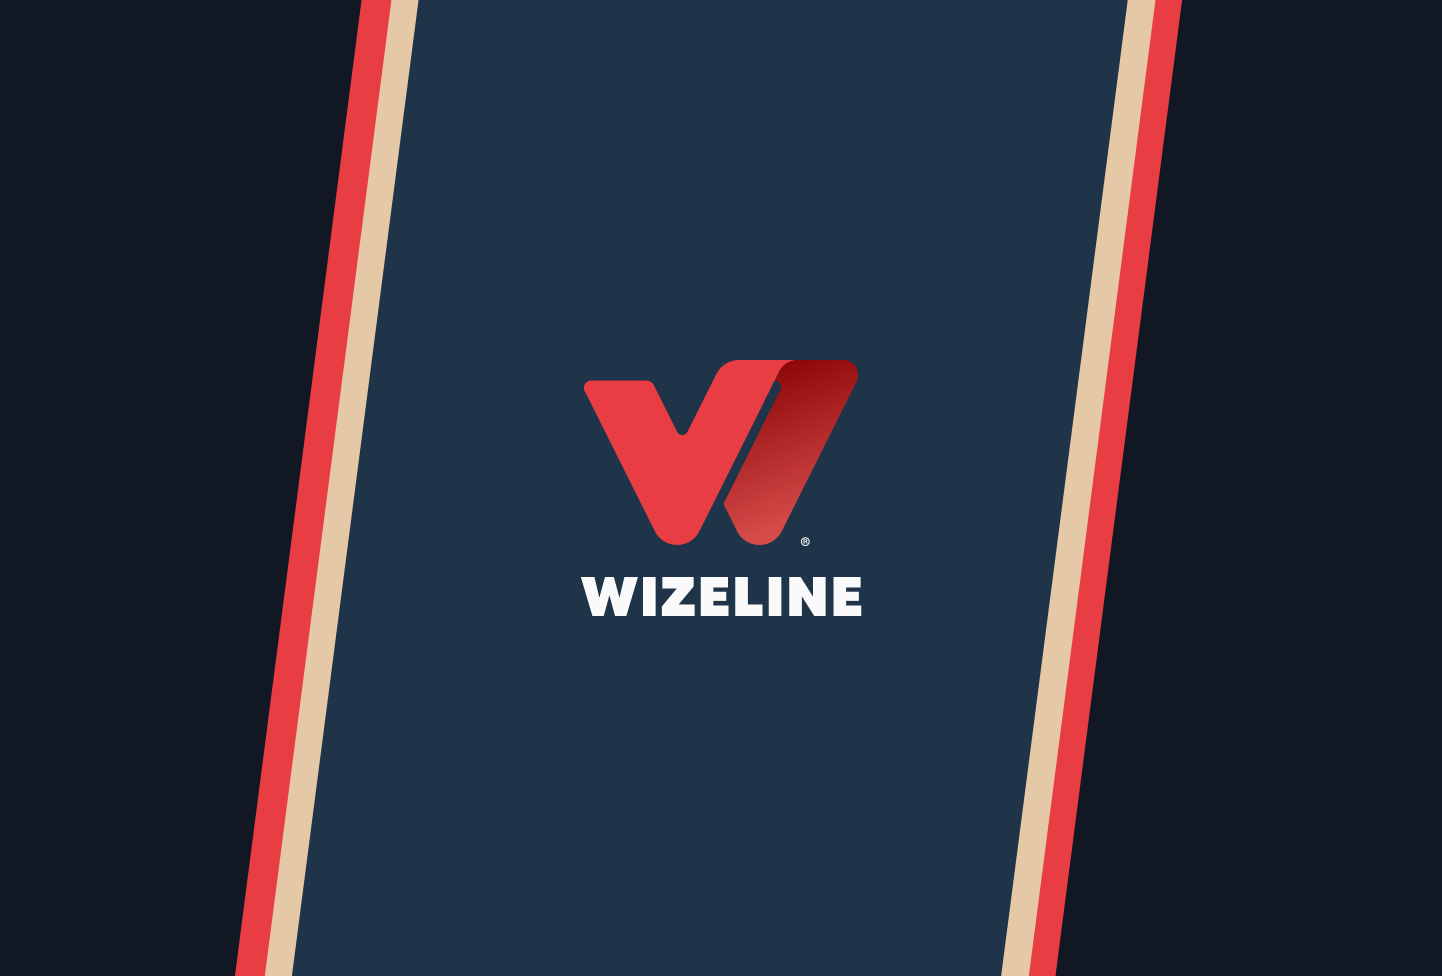 Wizeline Unveils Brand Evolution, Highlighting Its People-Centric Culture and Hypergrowth as a Global Technology Leader